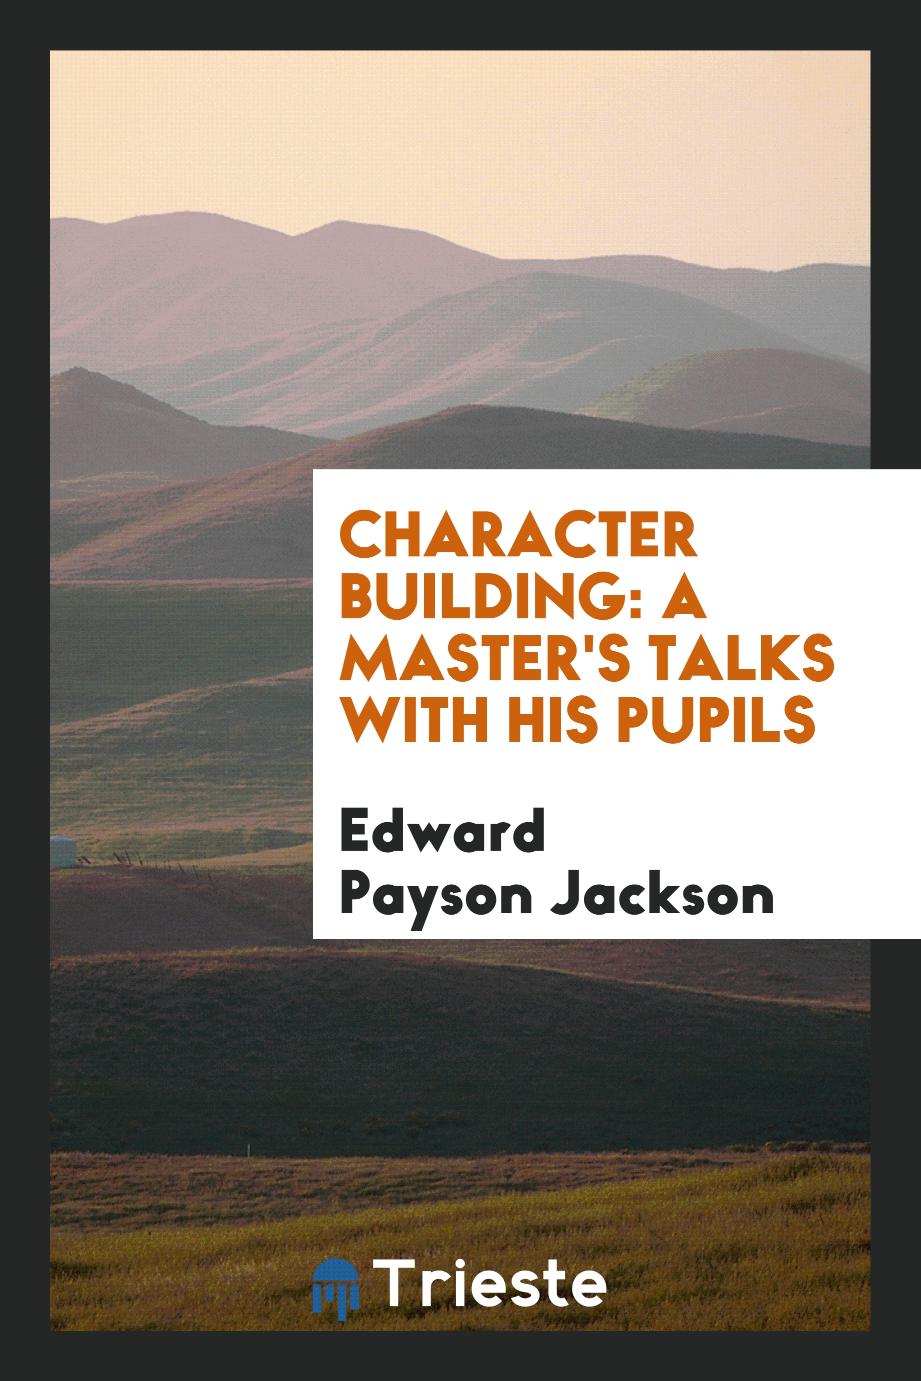 Character building: a master's talks with his pupils